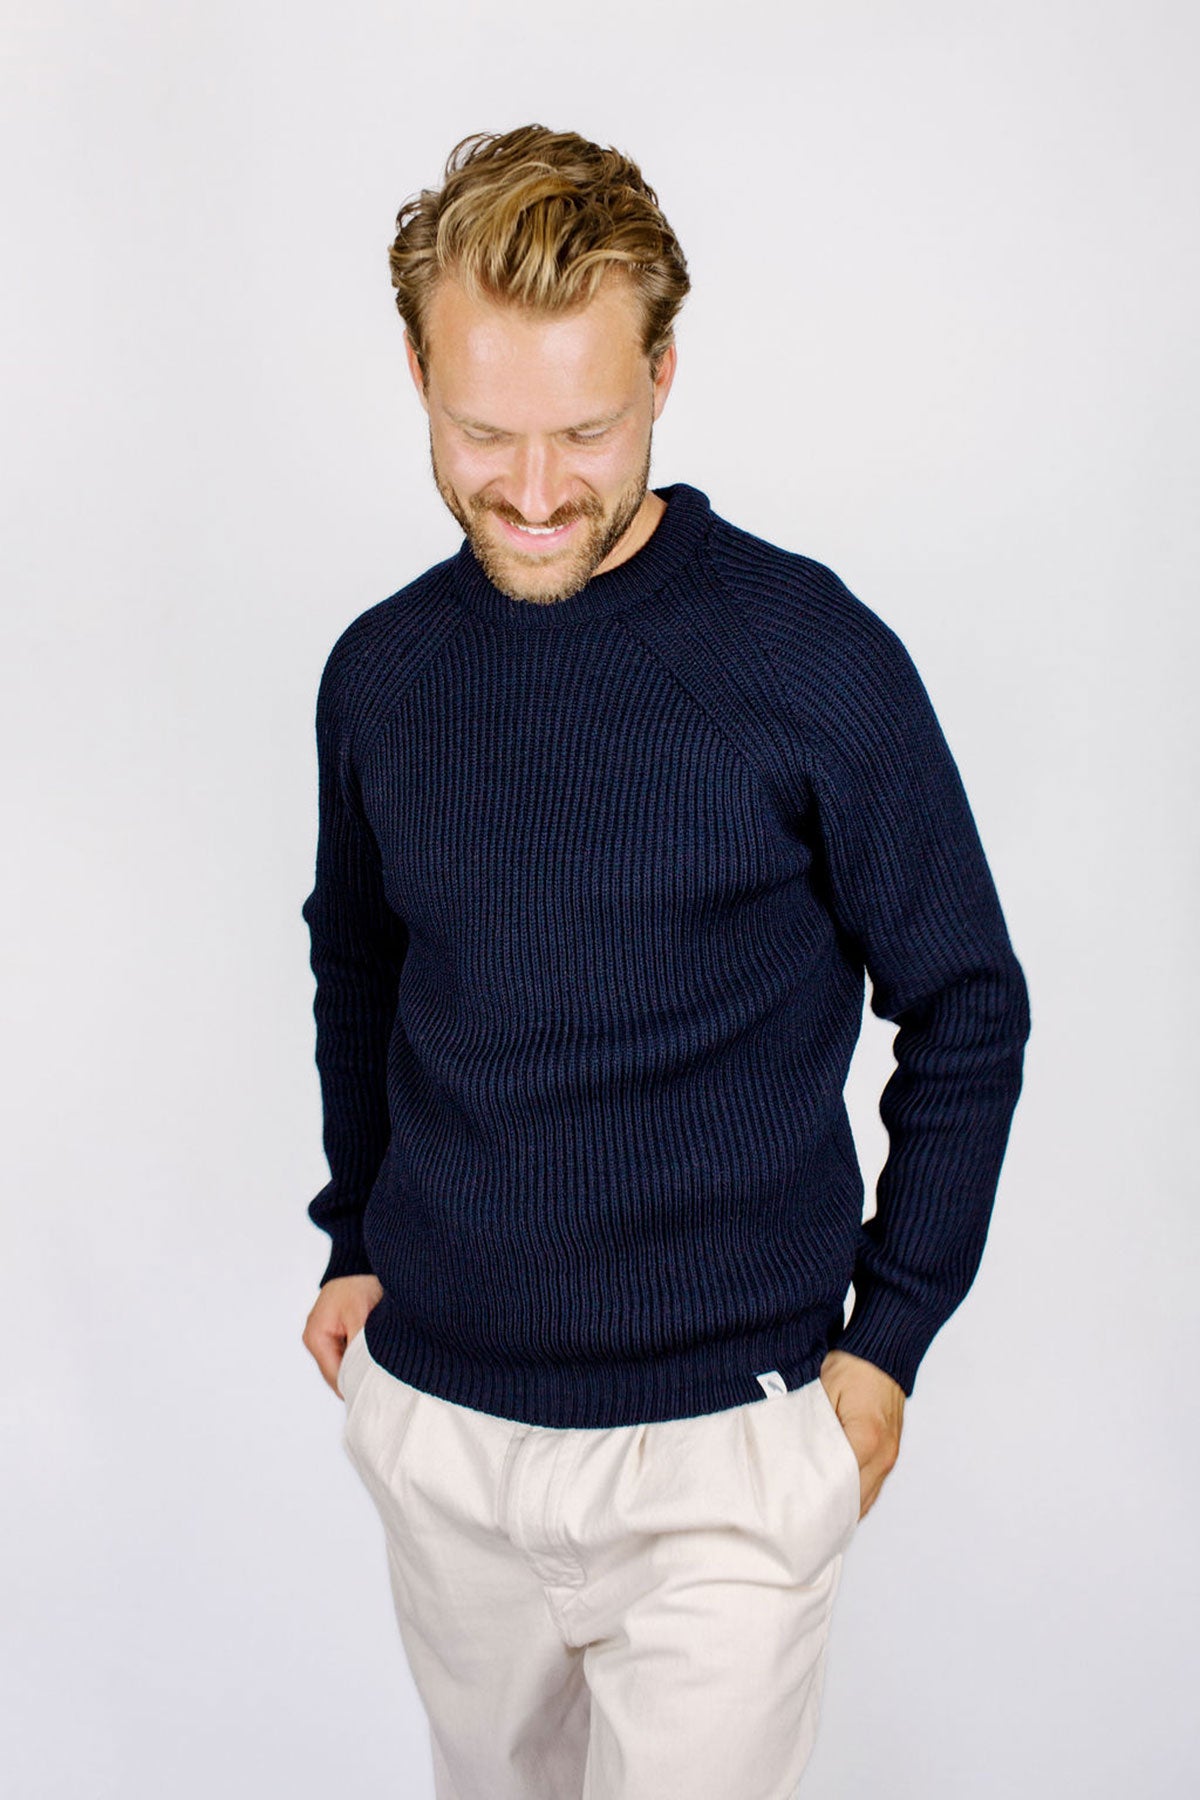 Peregrine - Ford Crew Jumper in Navy